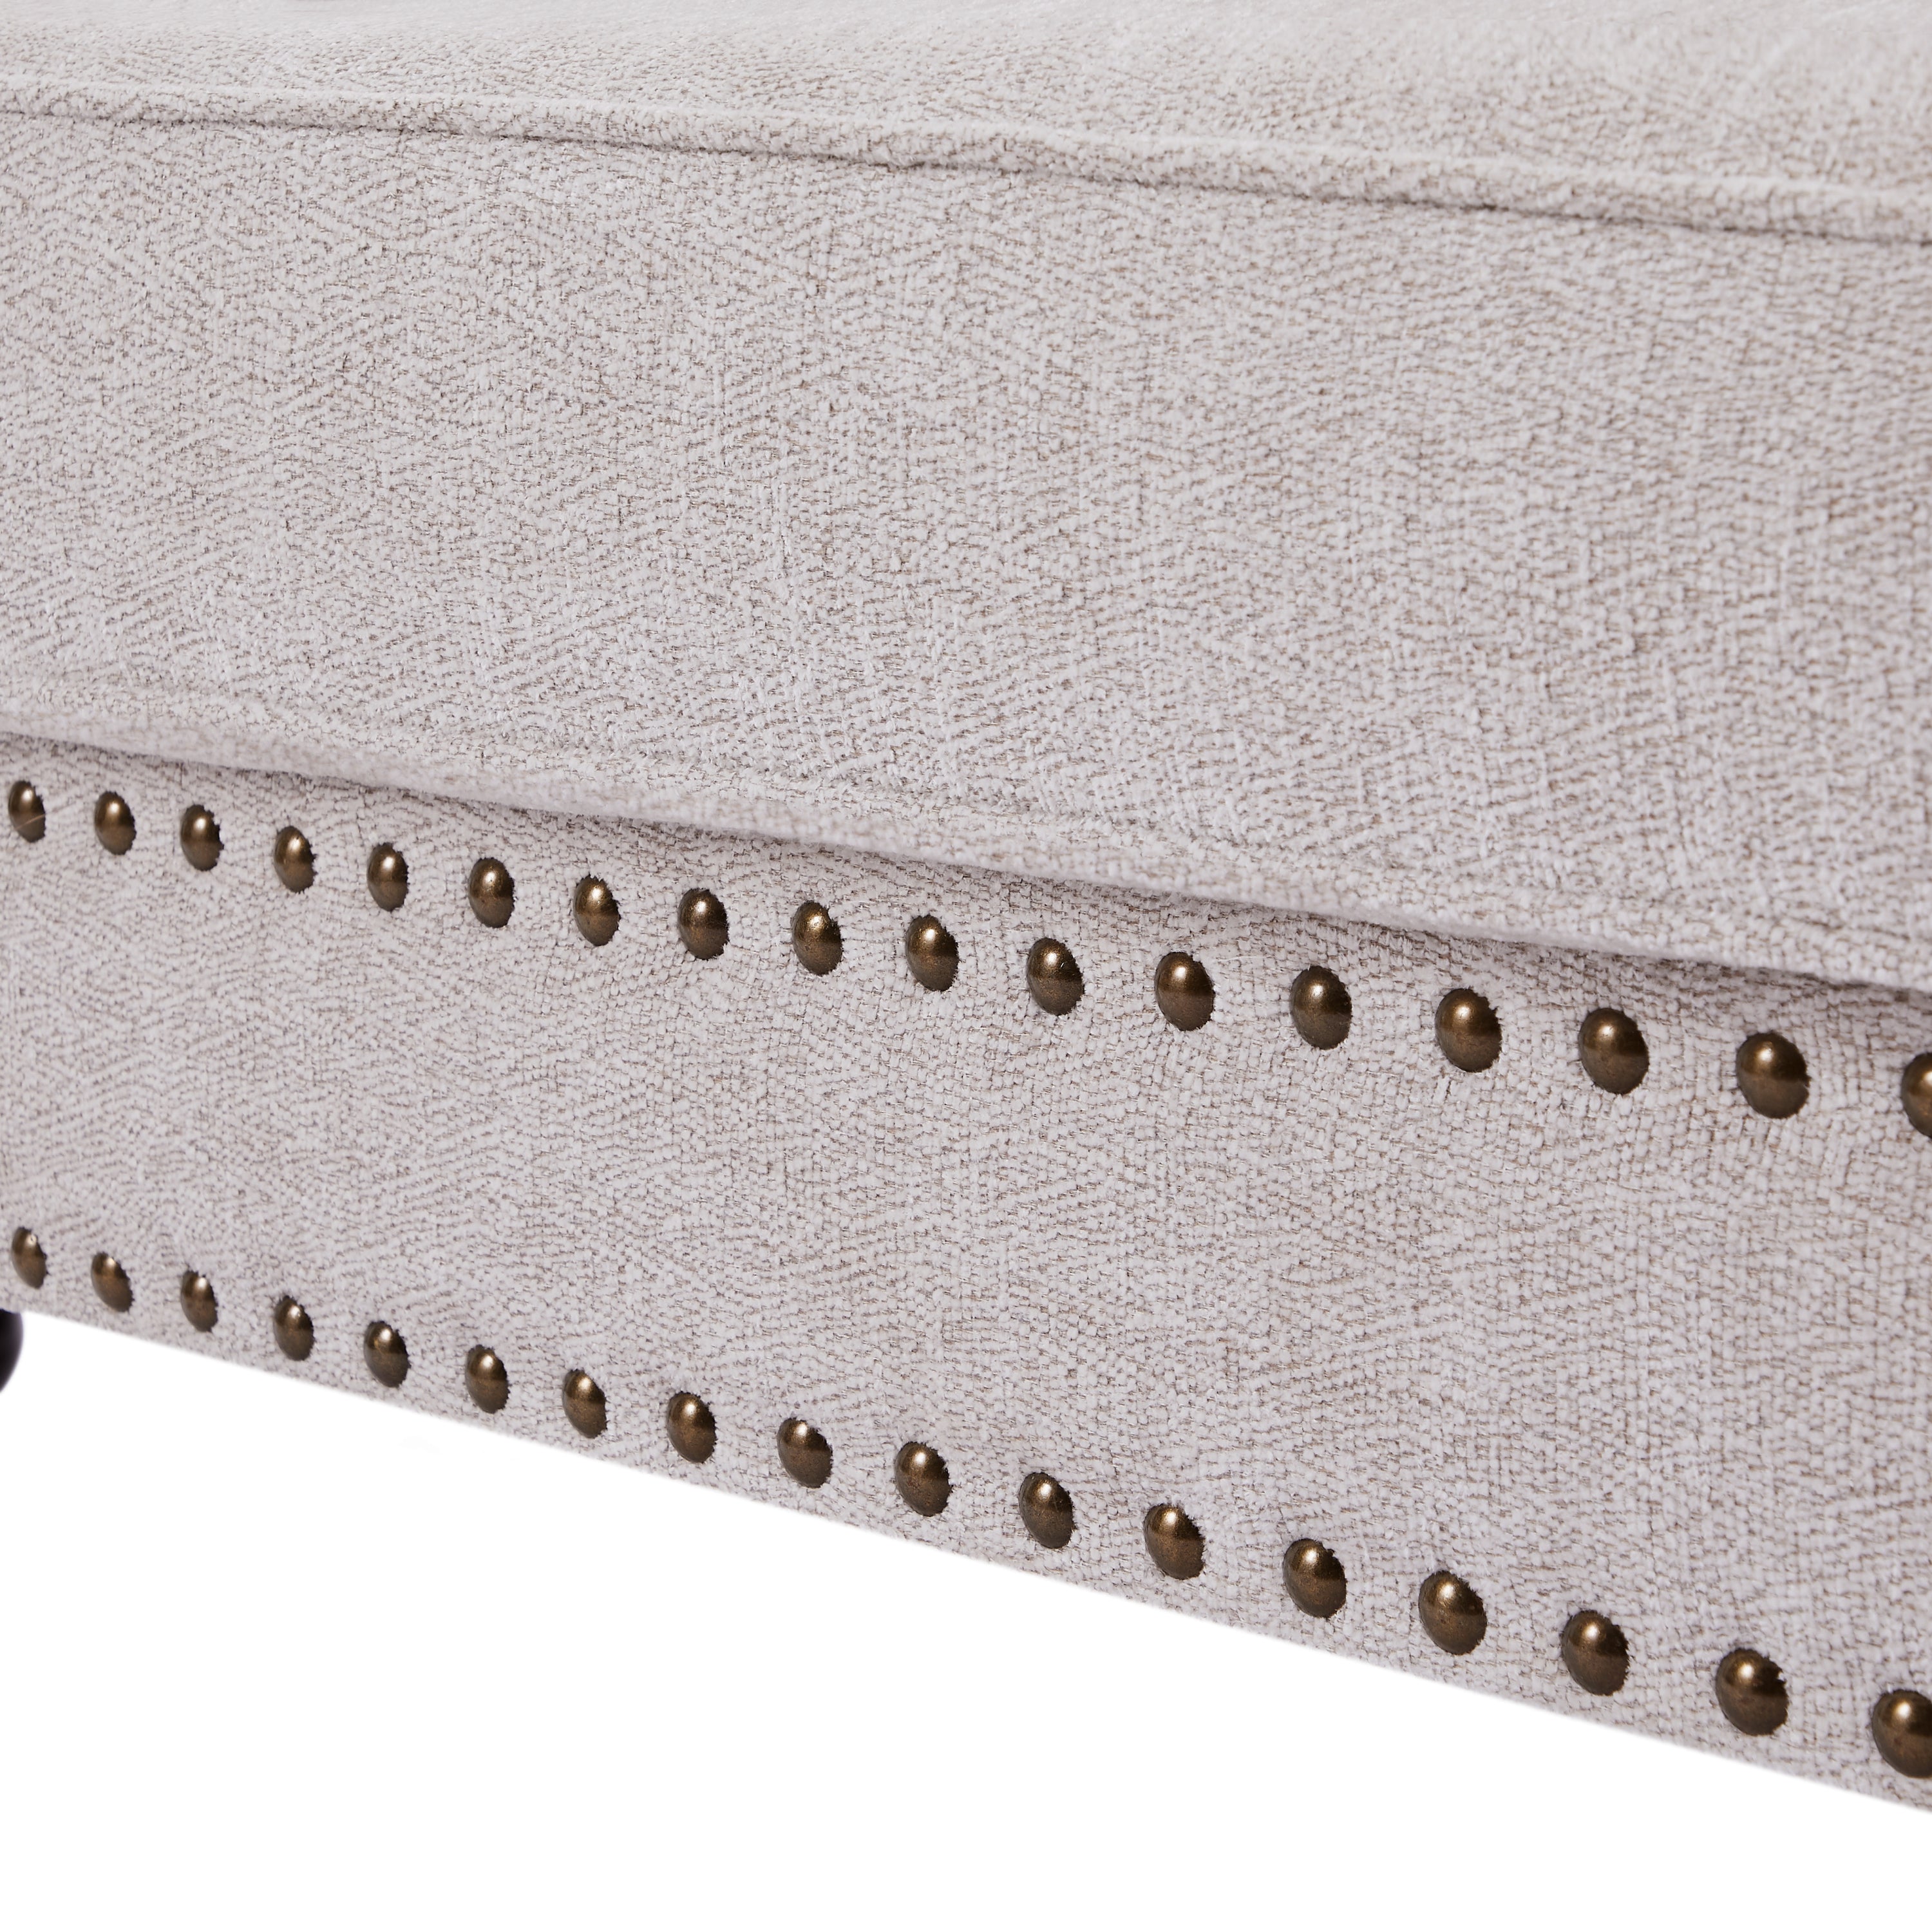 Chenille modern Upholstered Sofas 1 Seater Couches with Nails and - a6cb860b0866425e835b7ccc5da915e0